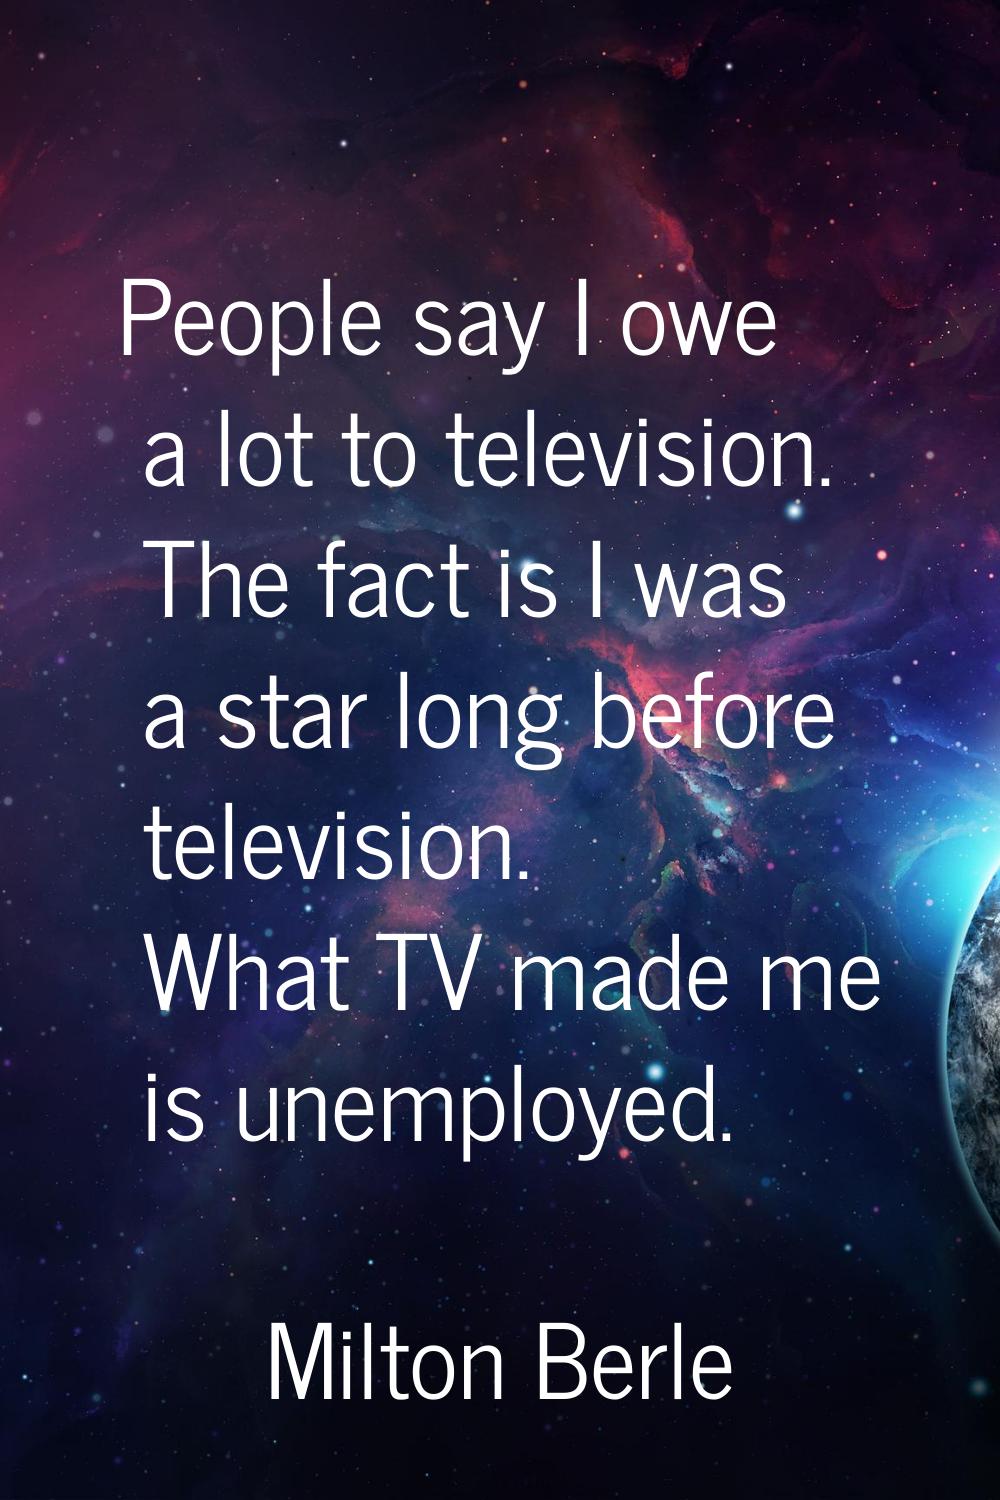 People say I owe a lot to television. The fact is I was a star long before television. What TV made